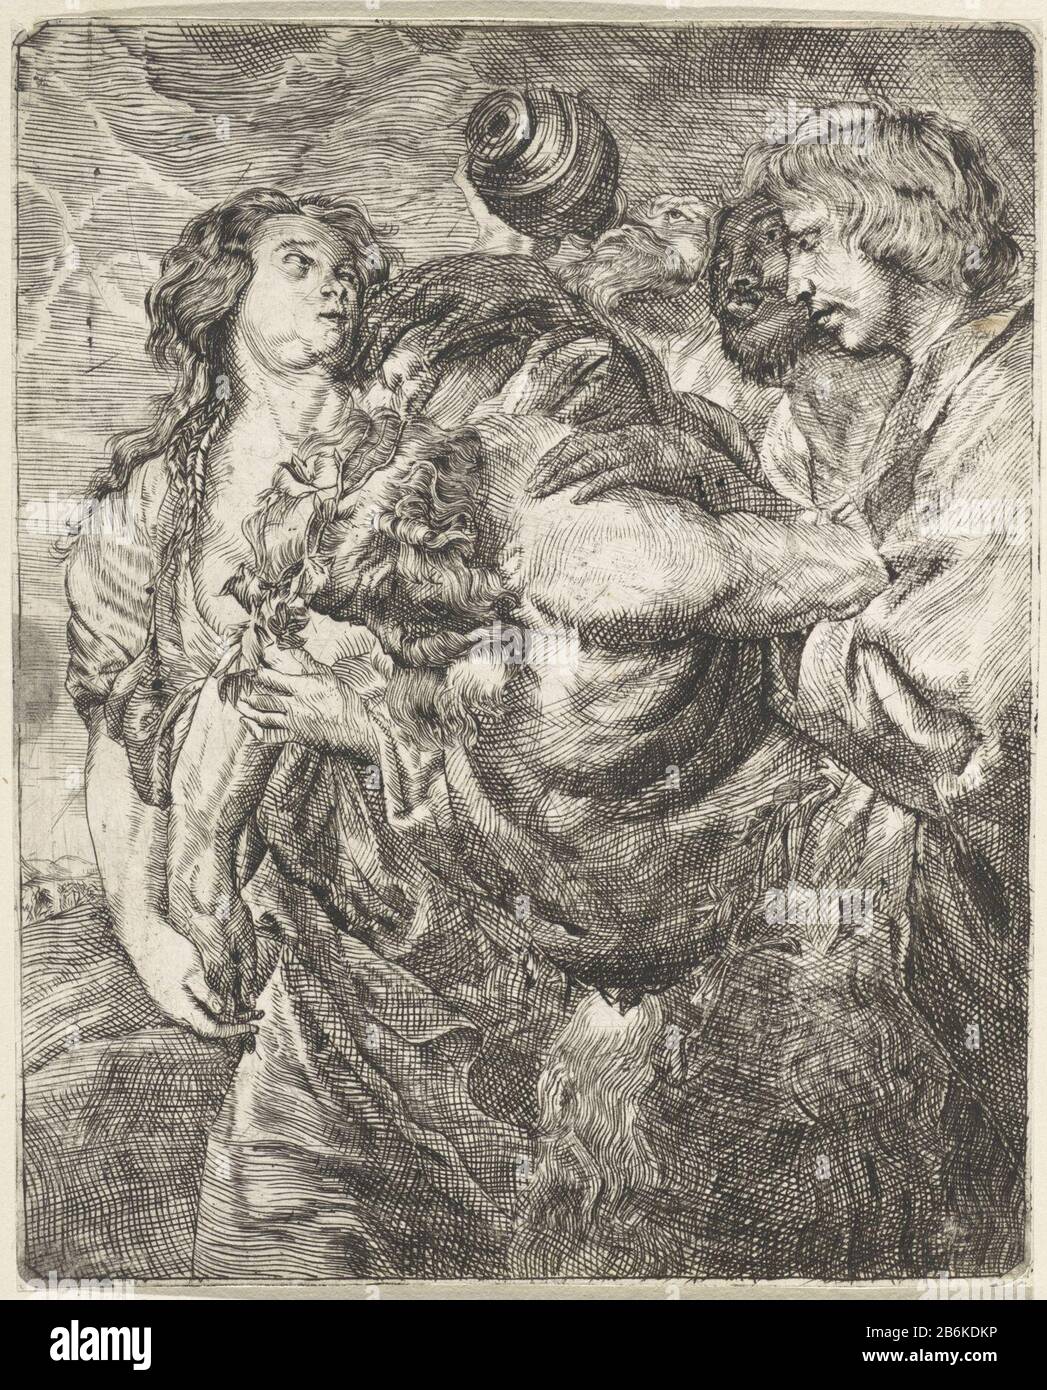 Drunken Silenus Drunken Silenus is bent. In his hair he ivy. He is supported by a maenad and some male followers of Bacchus. One of them drinking from a kruik. Manufacturer : printmaker: anonymous to print by: Schelte Adamsz. Bolswertnaar design: Anthony van Dyck Place manufacture: Netherlands Date: 1615 - 1691 Physical features: car material: paper Technique: engra (printing process) Dimensions: plate edge: H 266 mm × W 215 mm Subject: (story of) Silenus Stock Photo